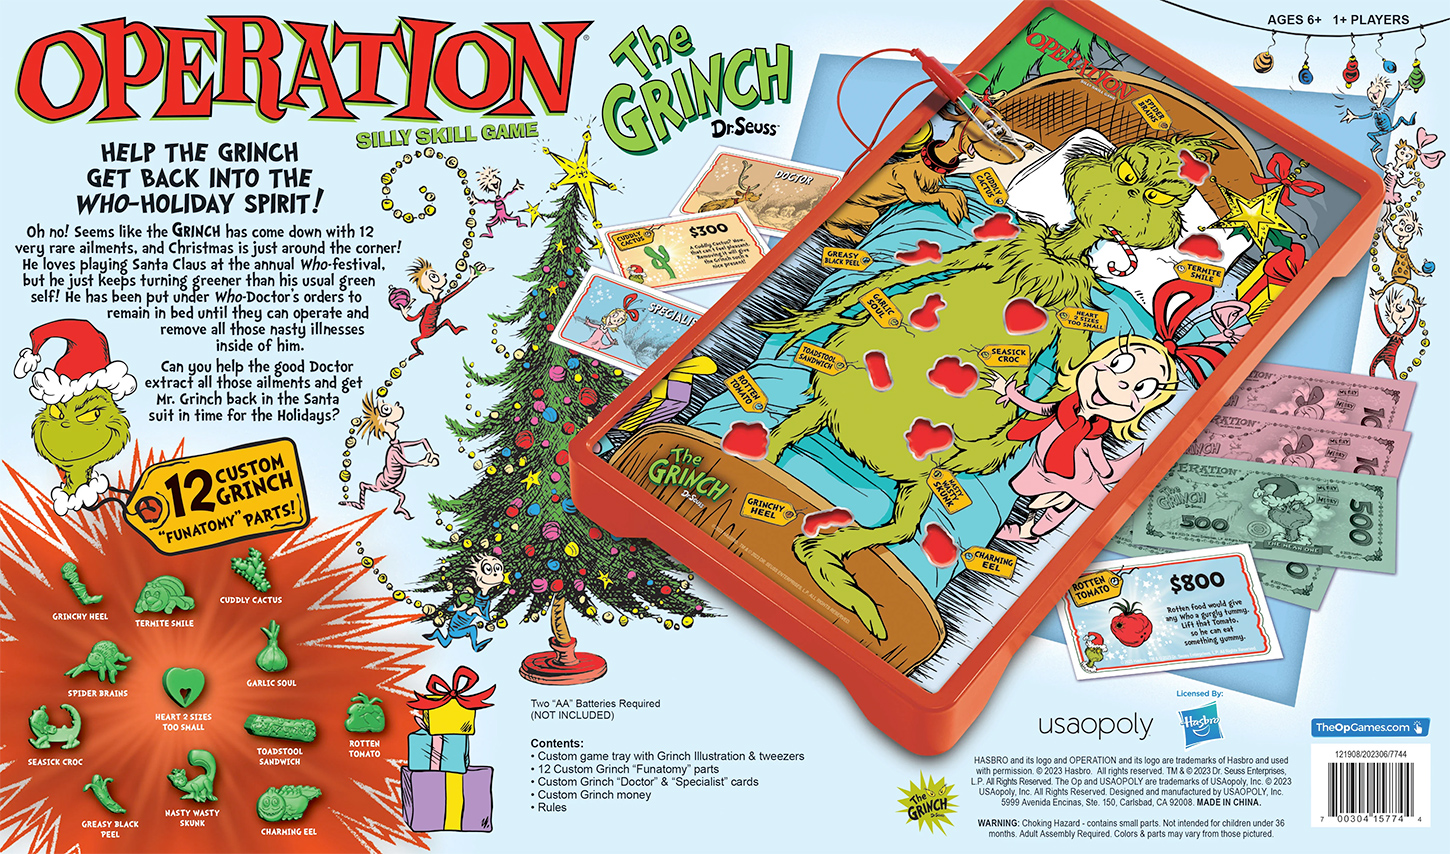 The Grinch Dr. Seuss Operation Game